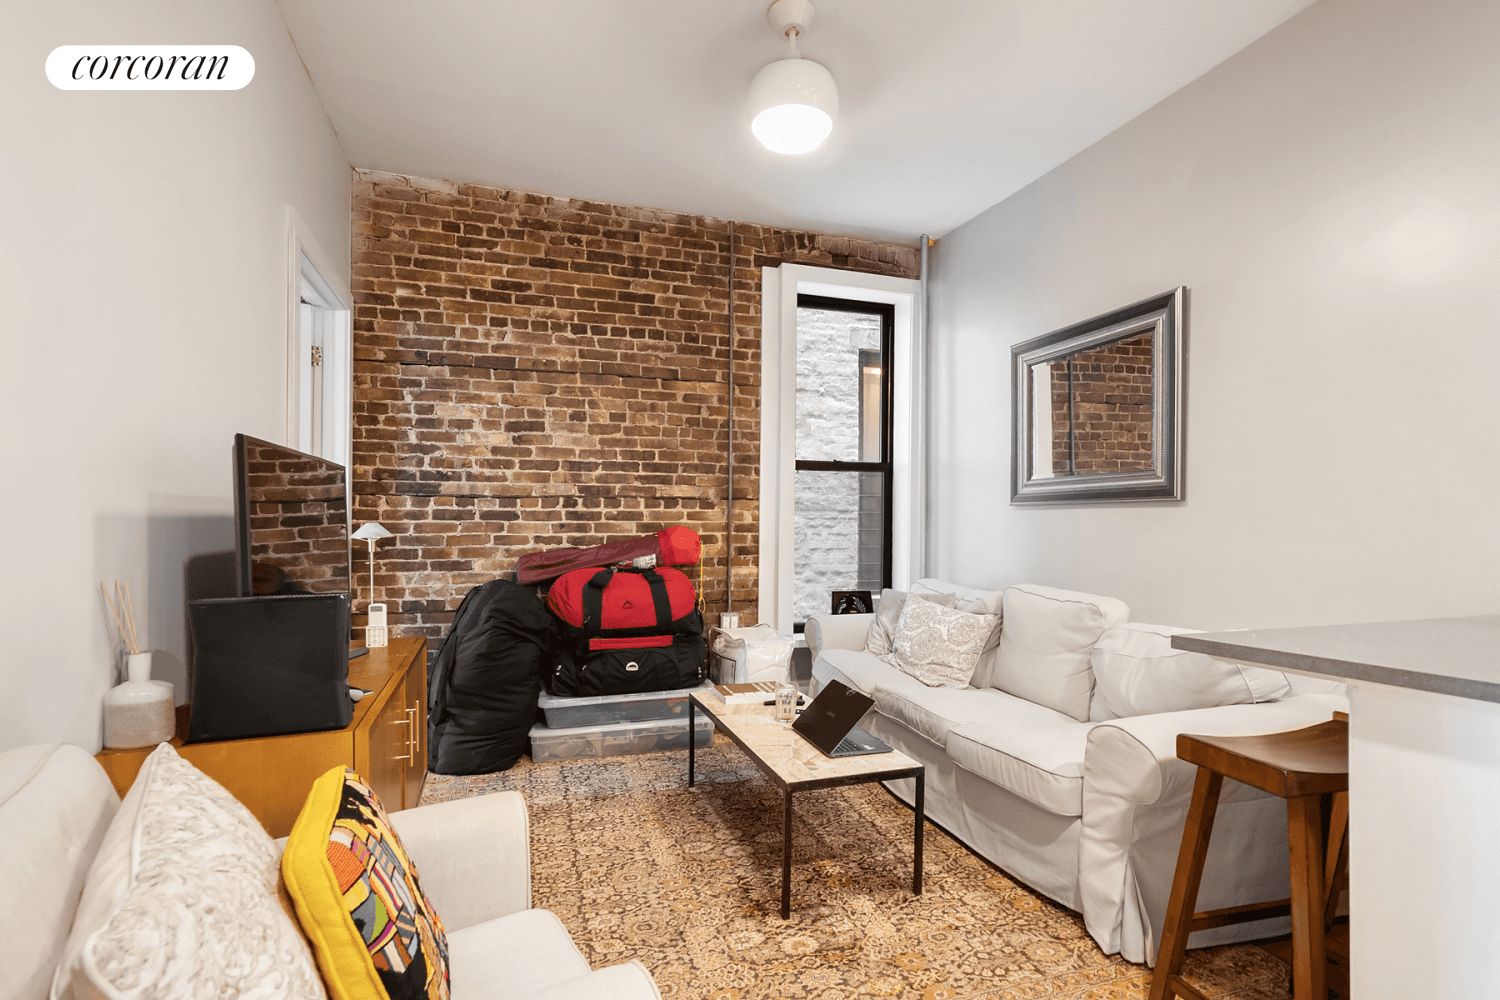 Located on the second floor of a lovely four story brick building, Apartment 4 features two spacious bedrooms, 9'2 ceilings and exposed brick.